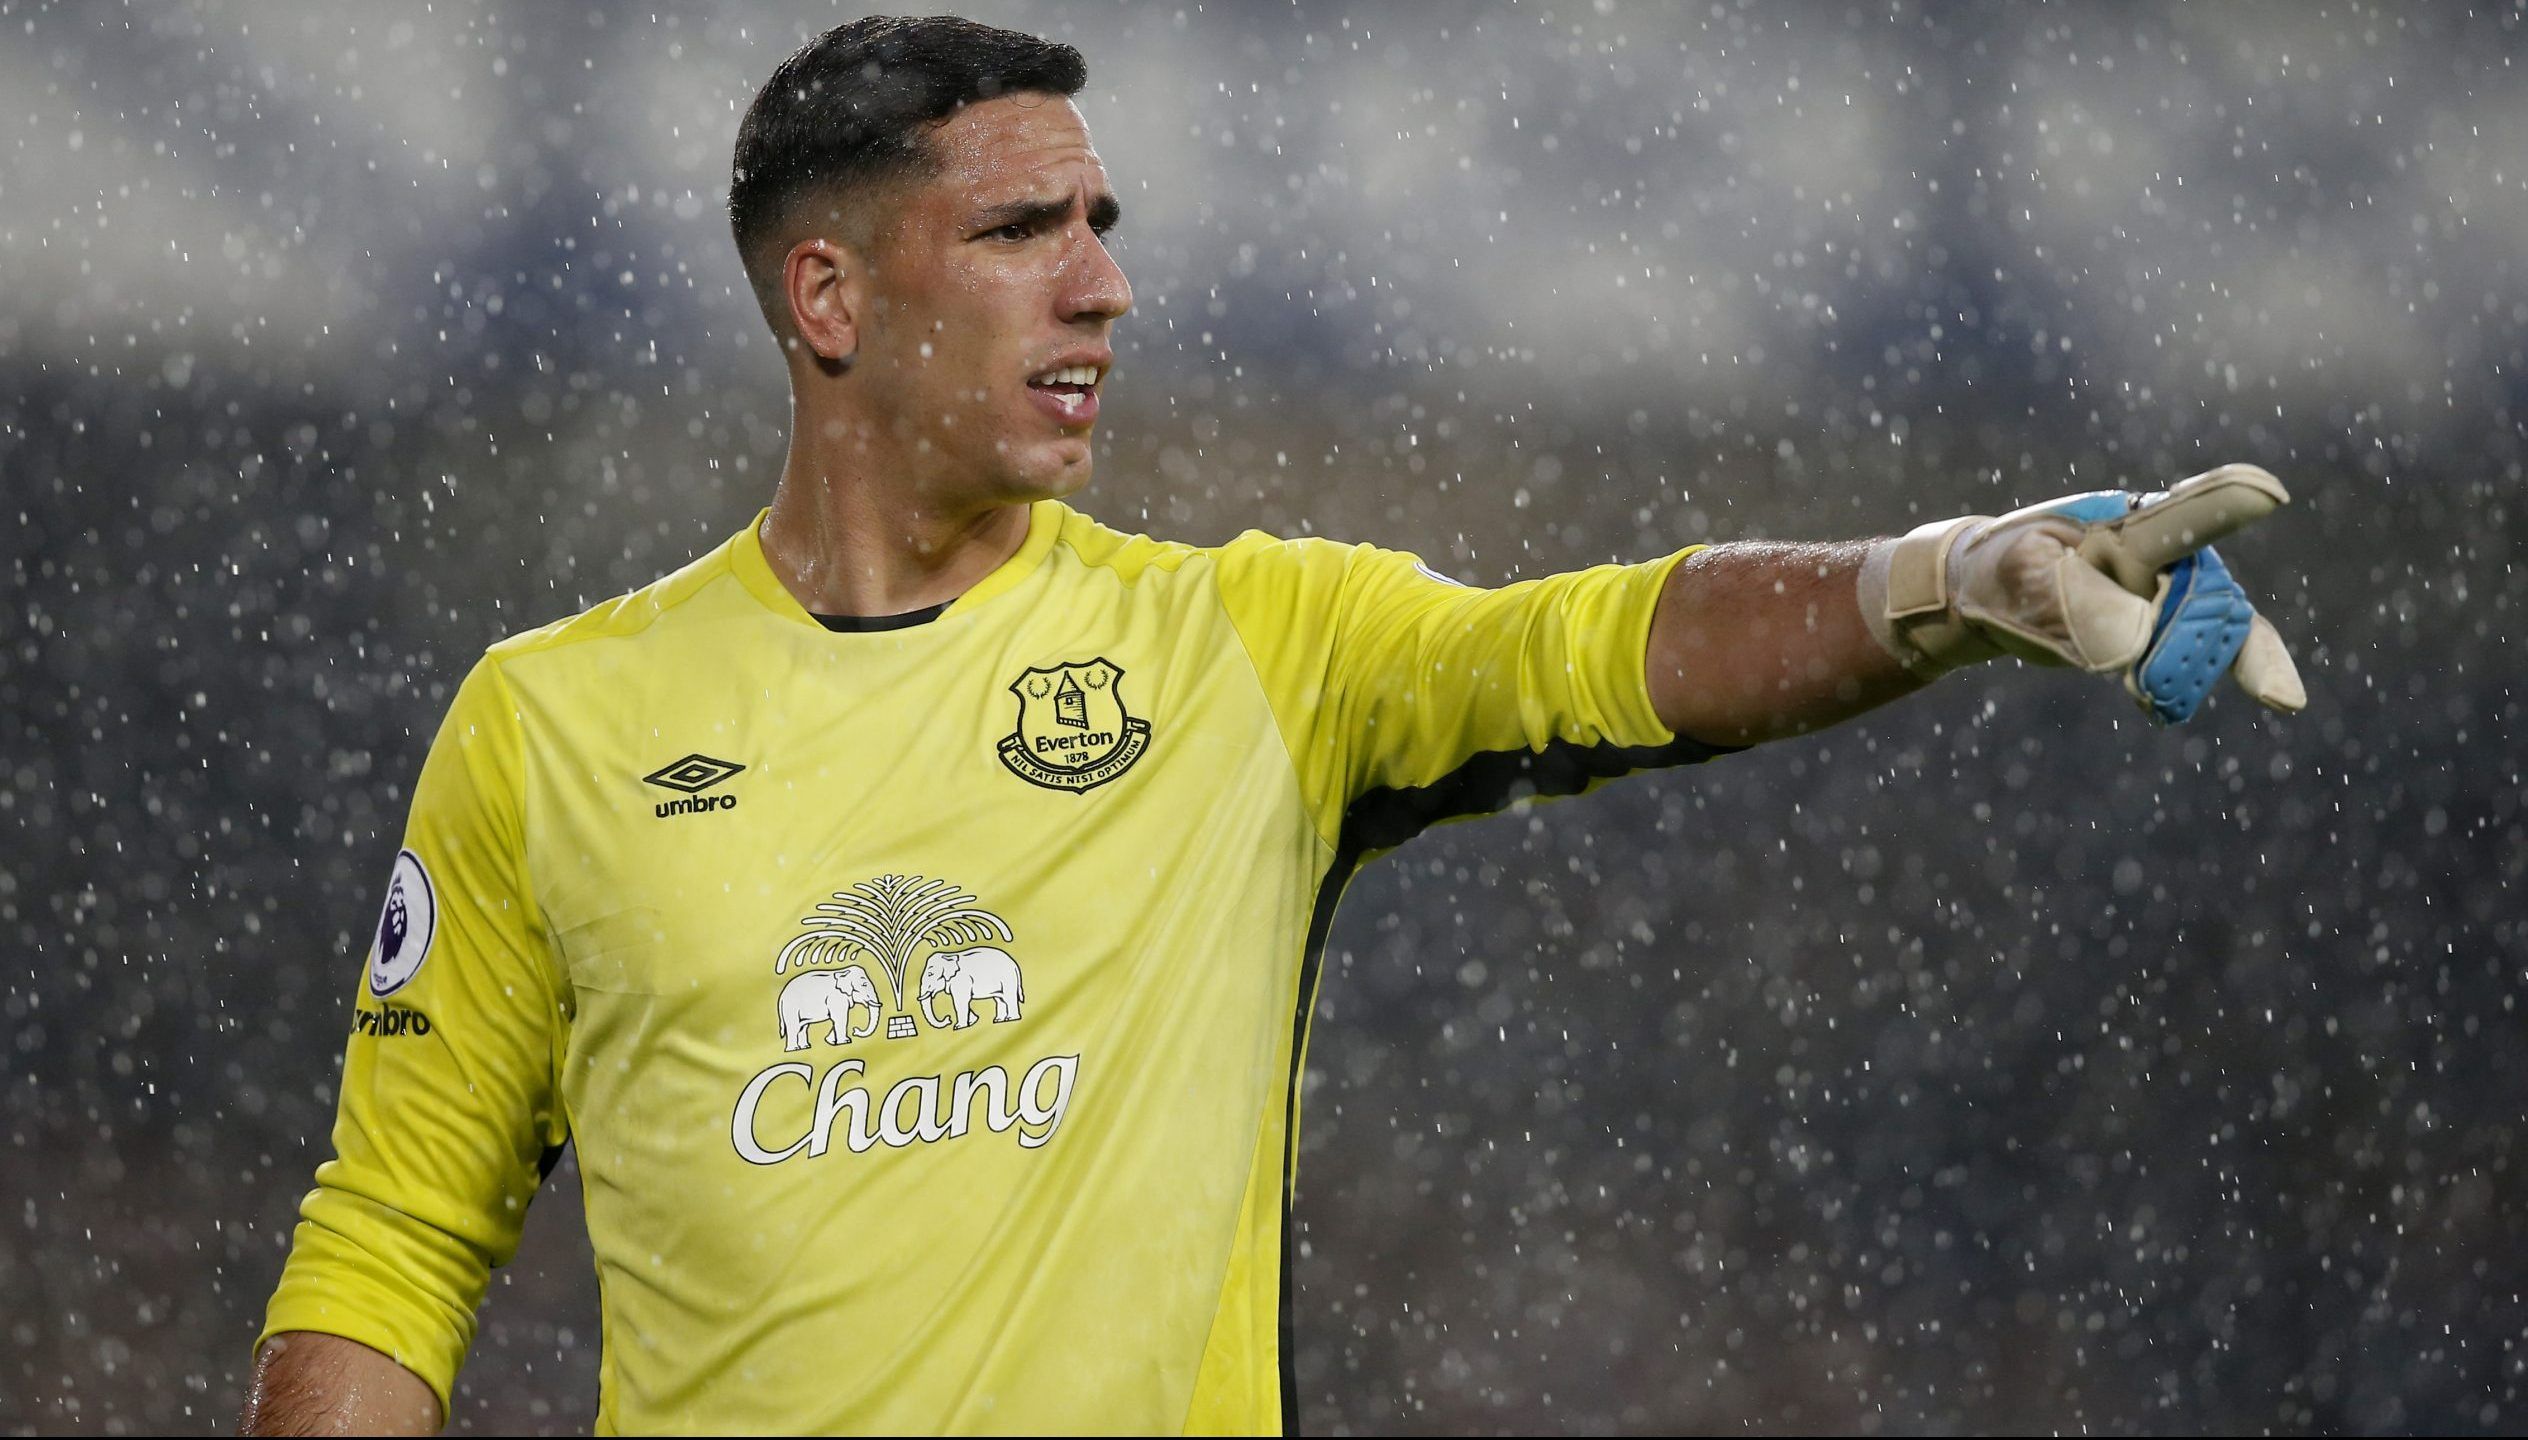 Britain Football Soccer - Everton v Watford - Premier League - Goodison Park - 12/5/17 Everton's Joel Robles gestures Reuters / Andrew Yates Livepic EDITORIAL USE ONLY. No use with unauthorized audio, video, data, fixture lists, club/league logos or 